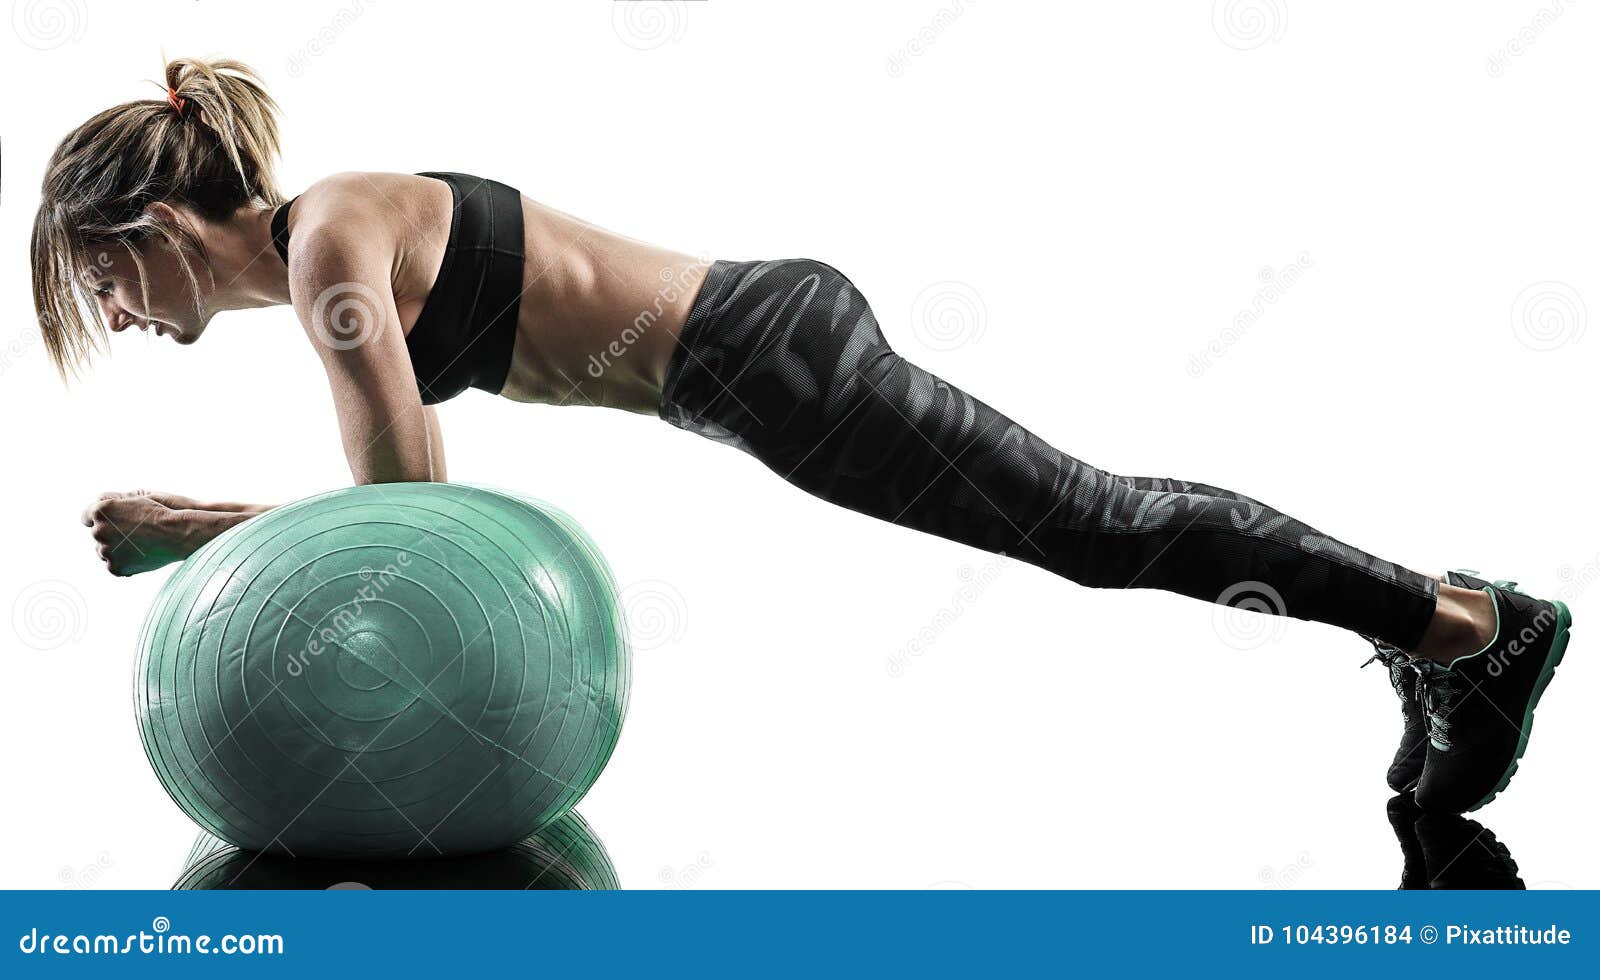 Give Your Workout a Boost With These Medicine Ball Exercises